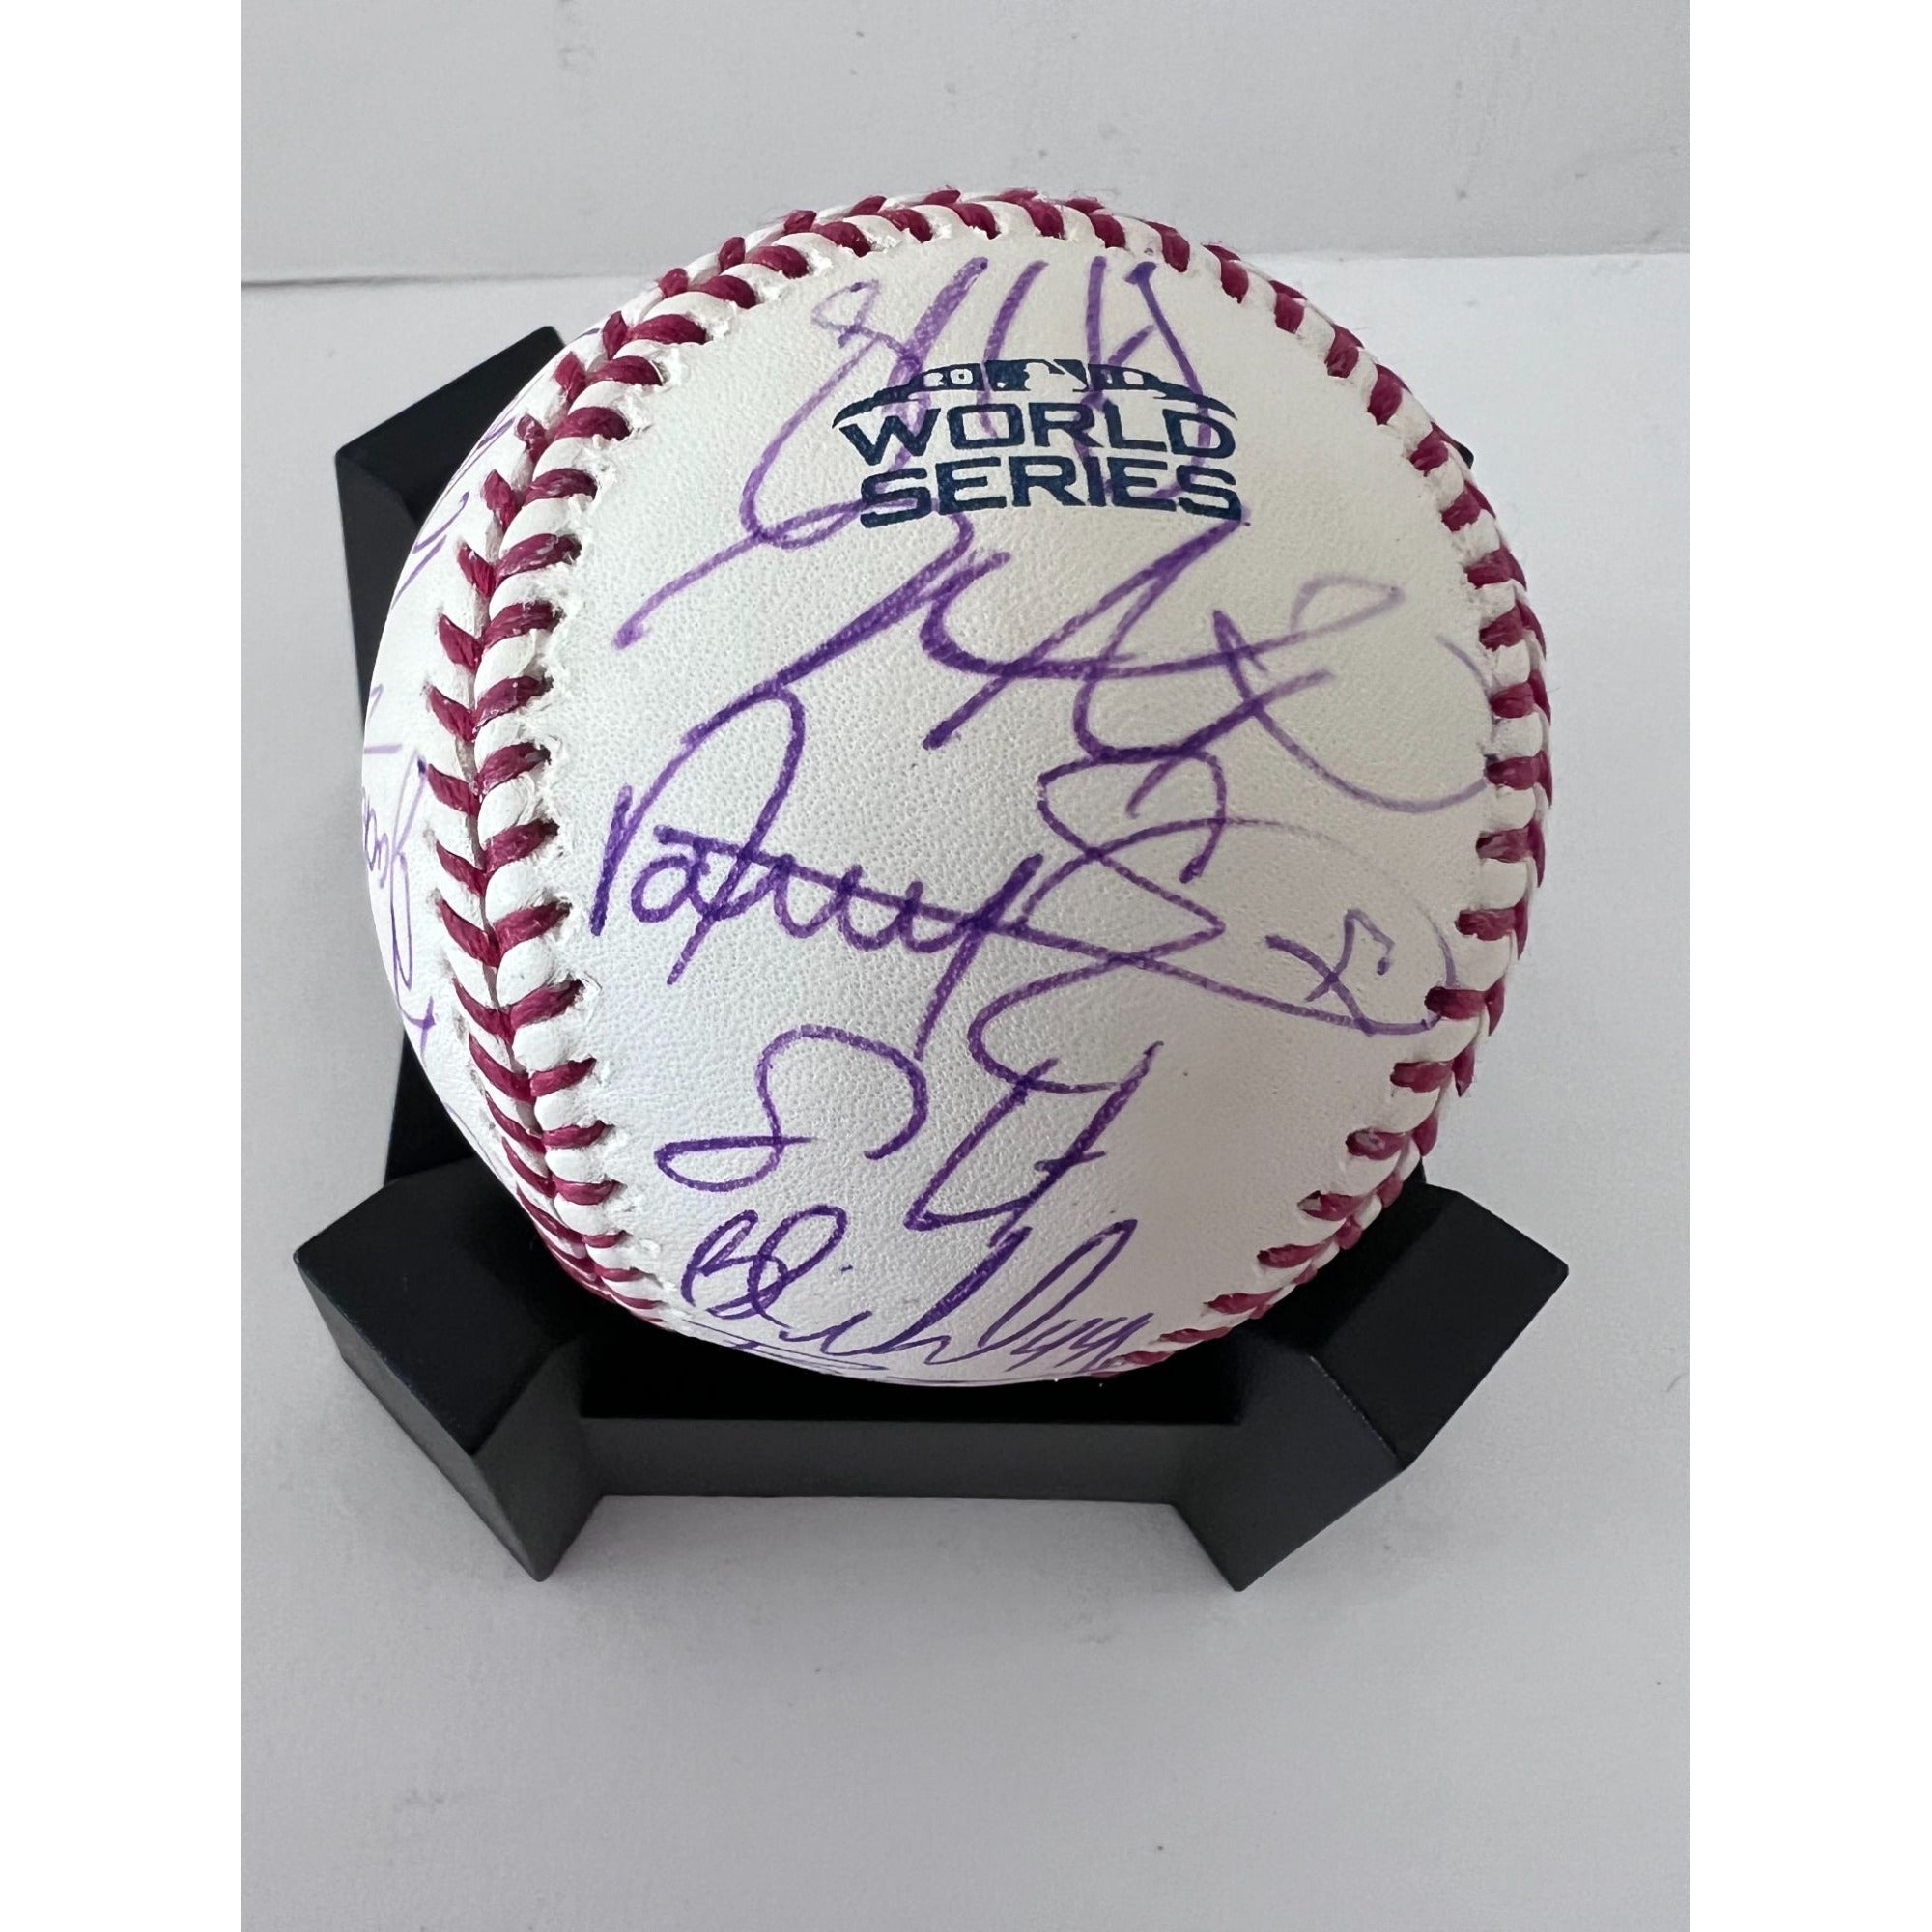 Buster Posey 2018 San Francisco Giants World Series champions team signed Rawlings commemorative baseball with proof